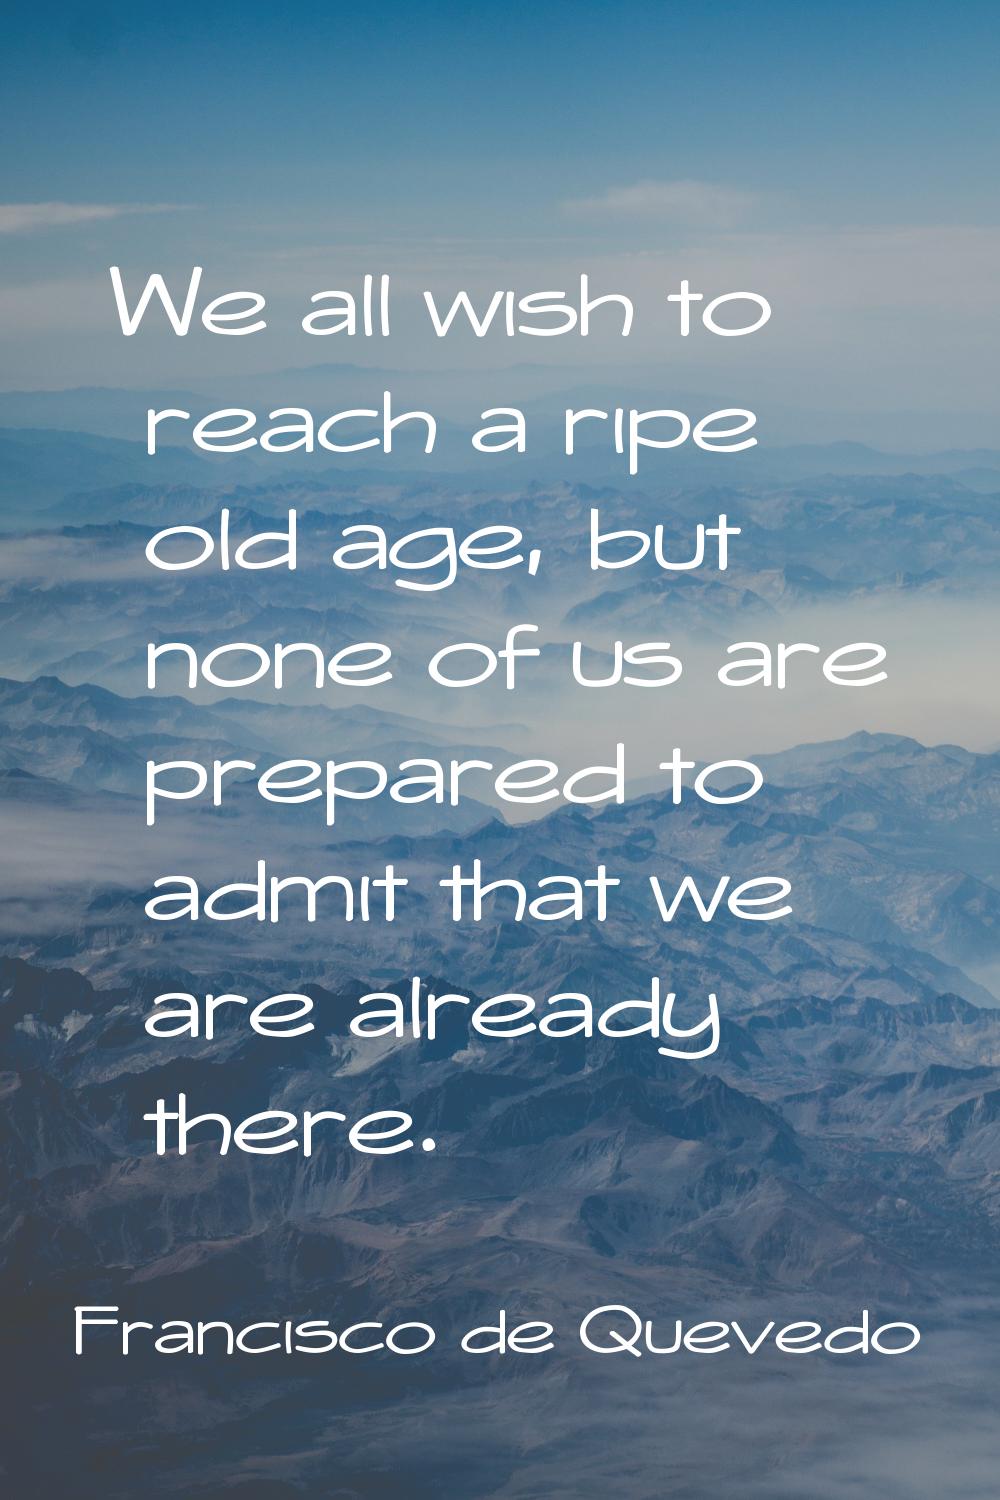 We all wish to reach a ripe old age, but none of us are prepared to admit that we are already there